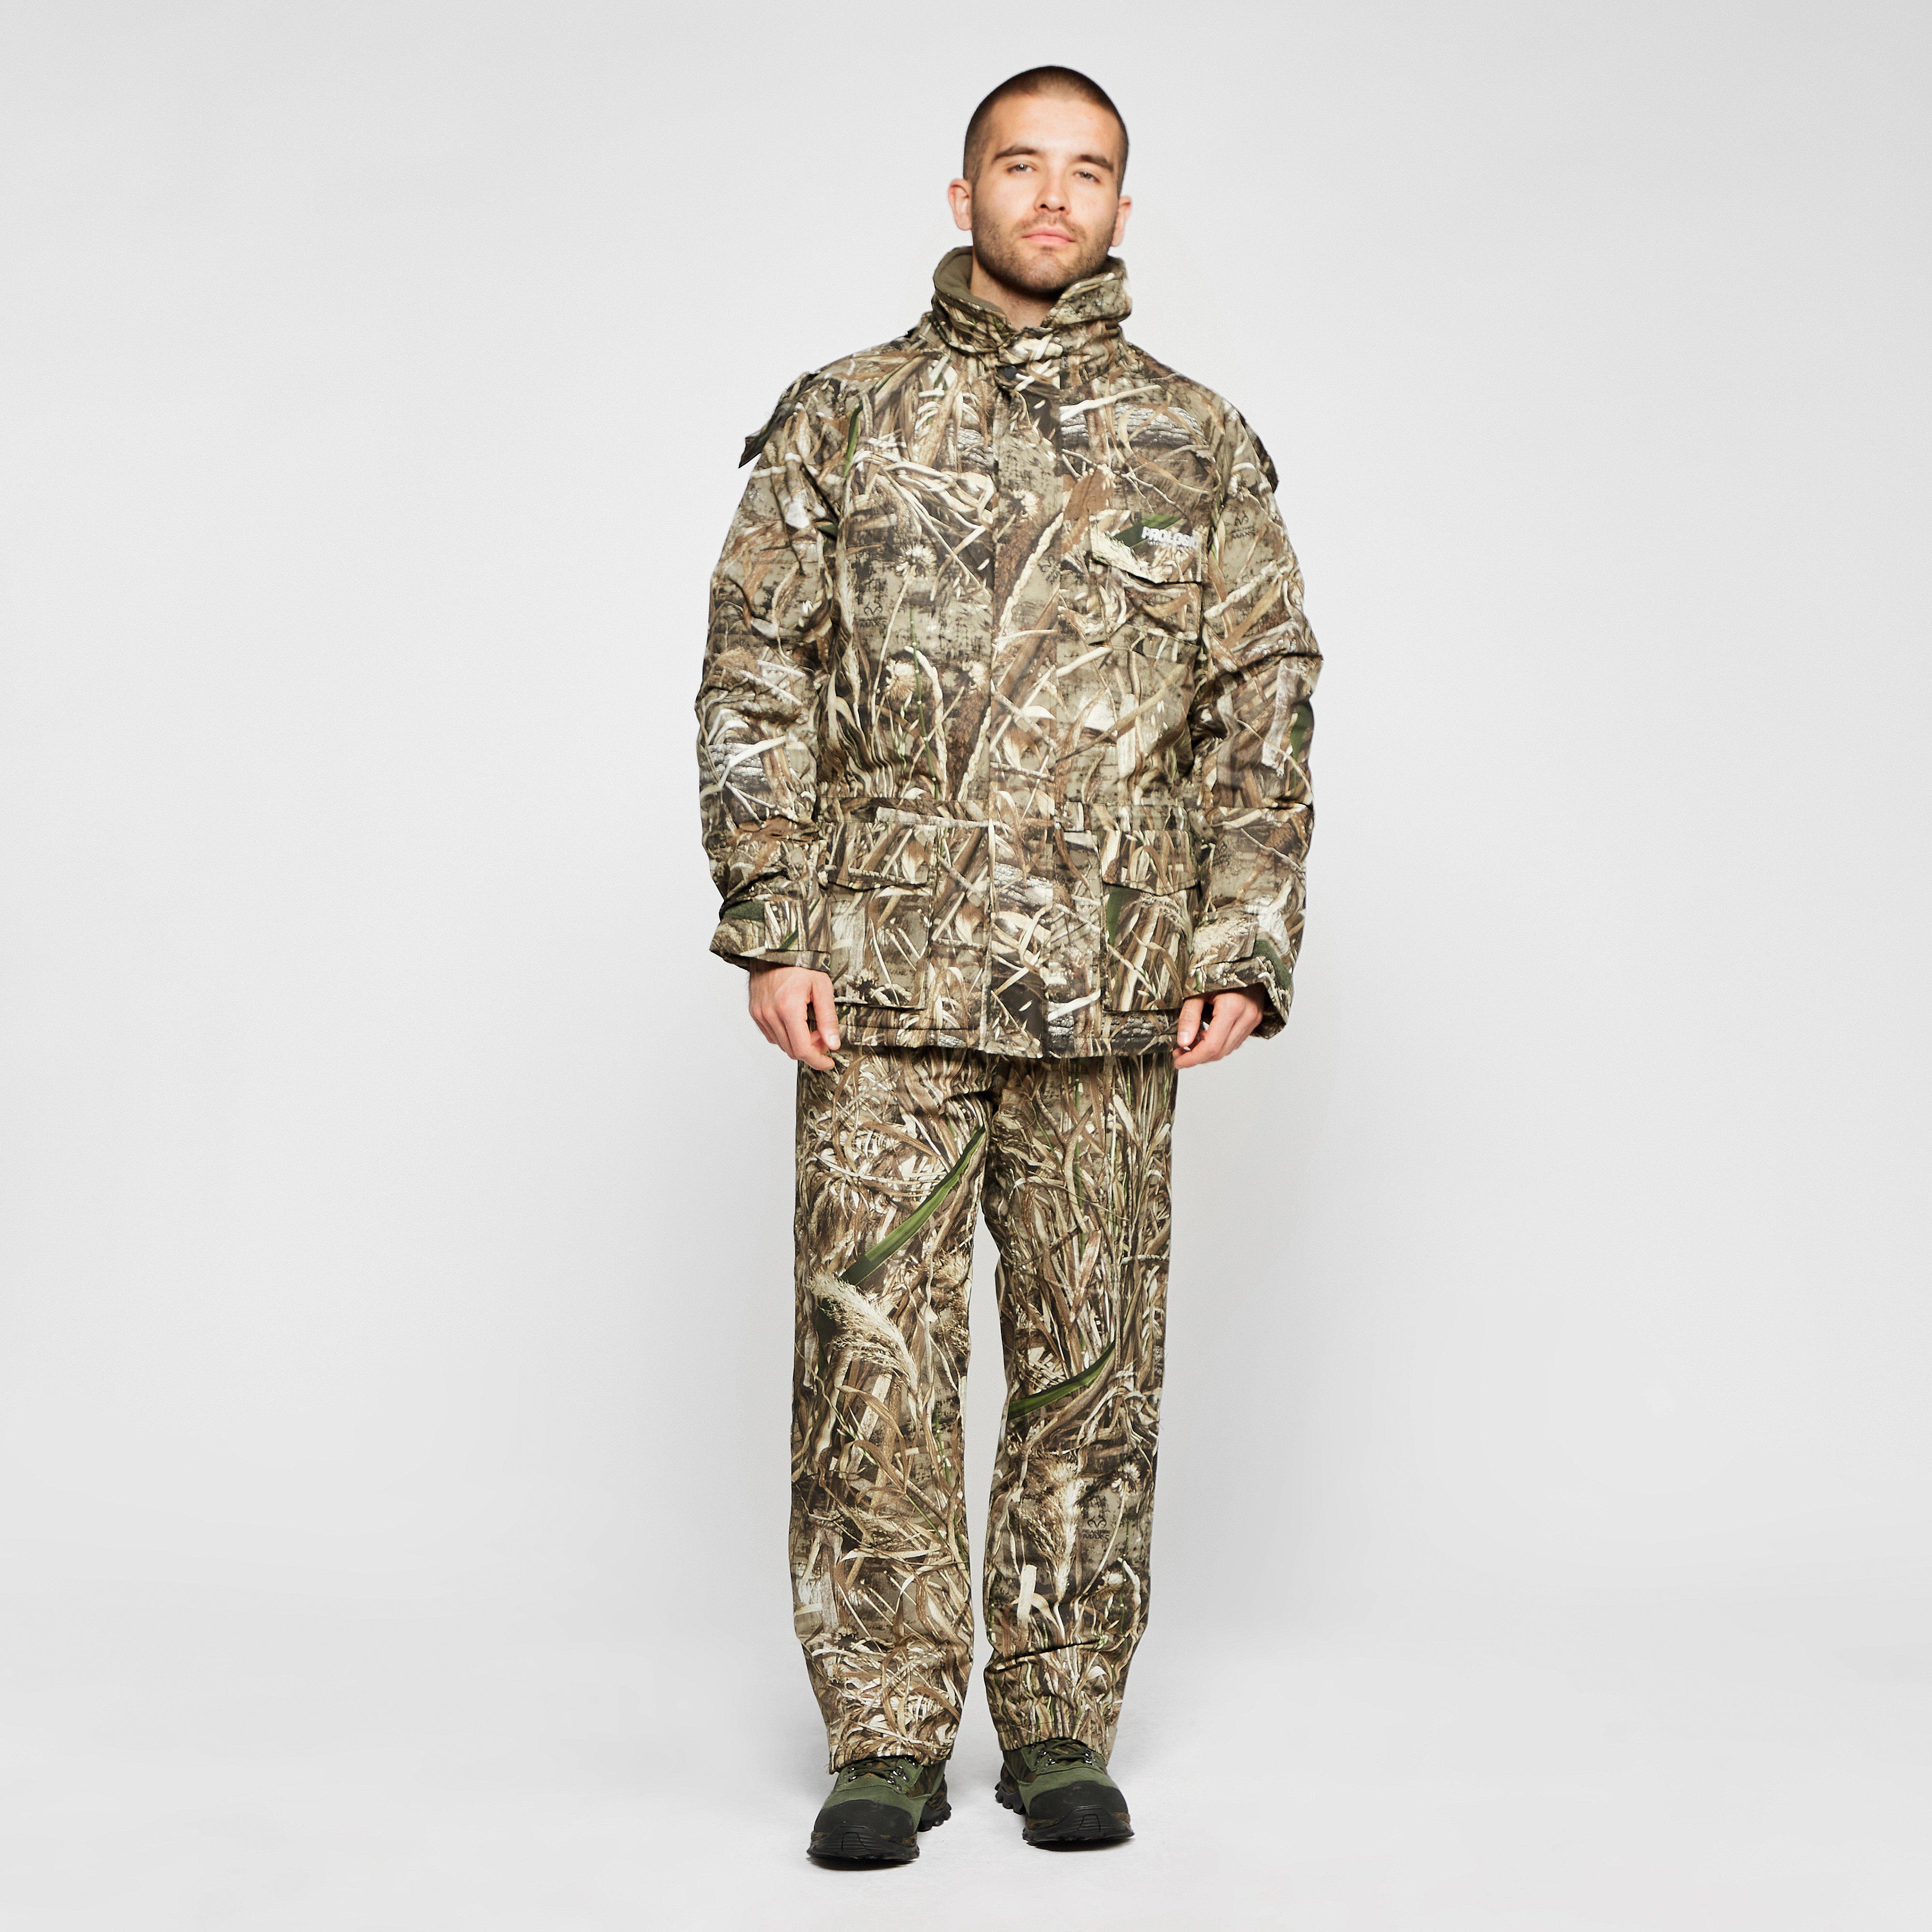 Prologic Comfort Thermo Suit (max5 Camo  2 Pcs)  Green